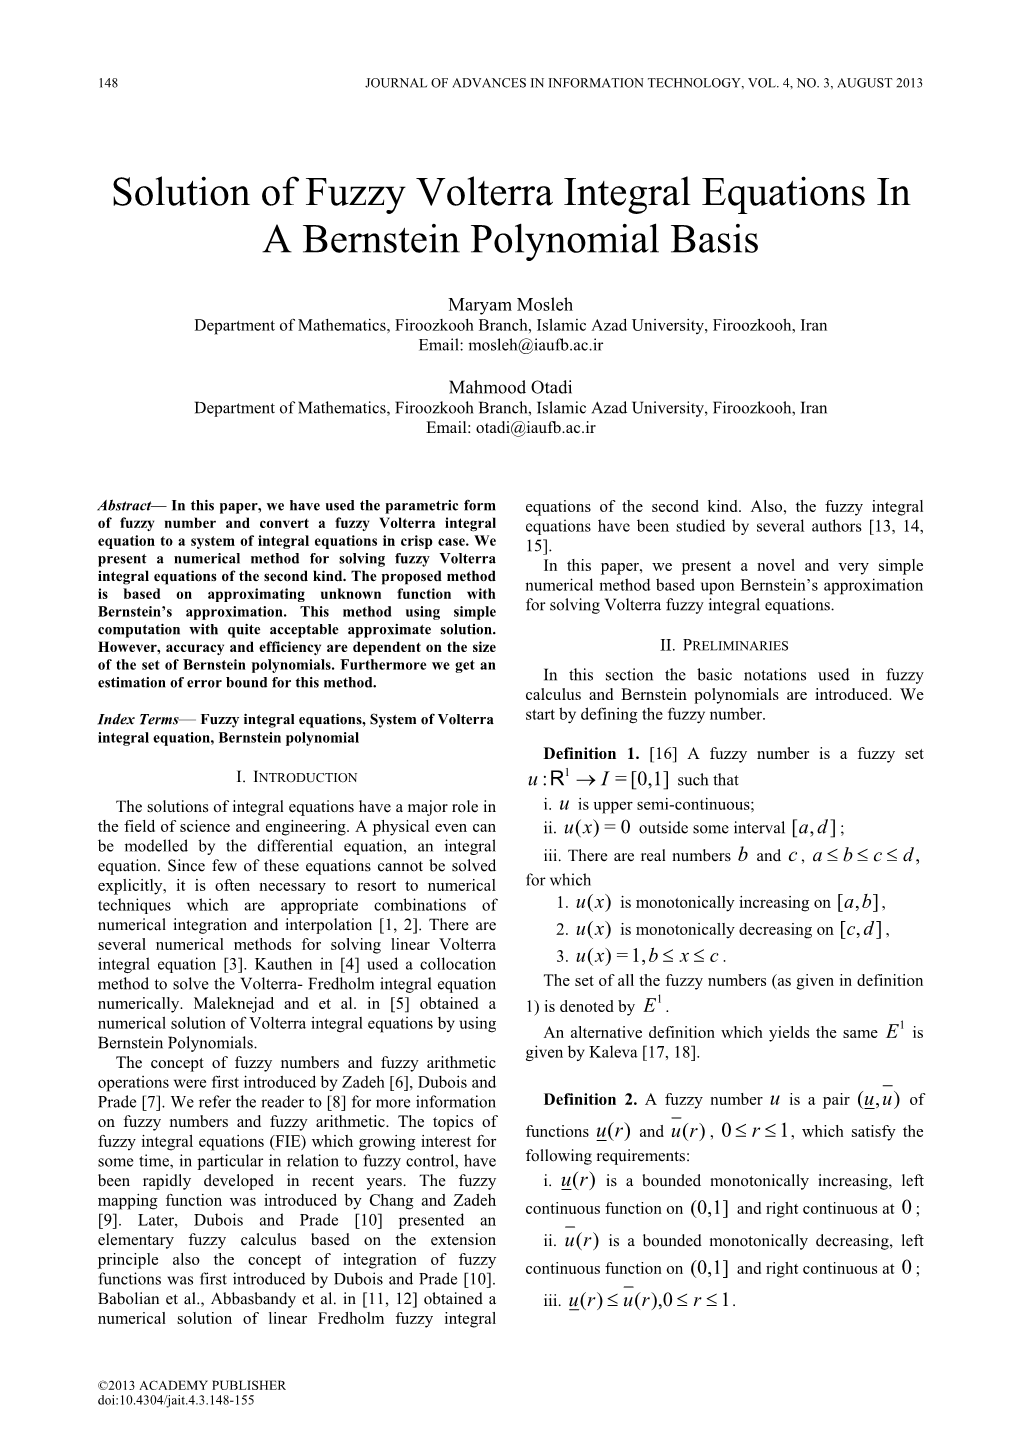 Solution of Fuzzy Volterra Integral Equations in a Bernstein Polynomial Basis